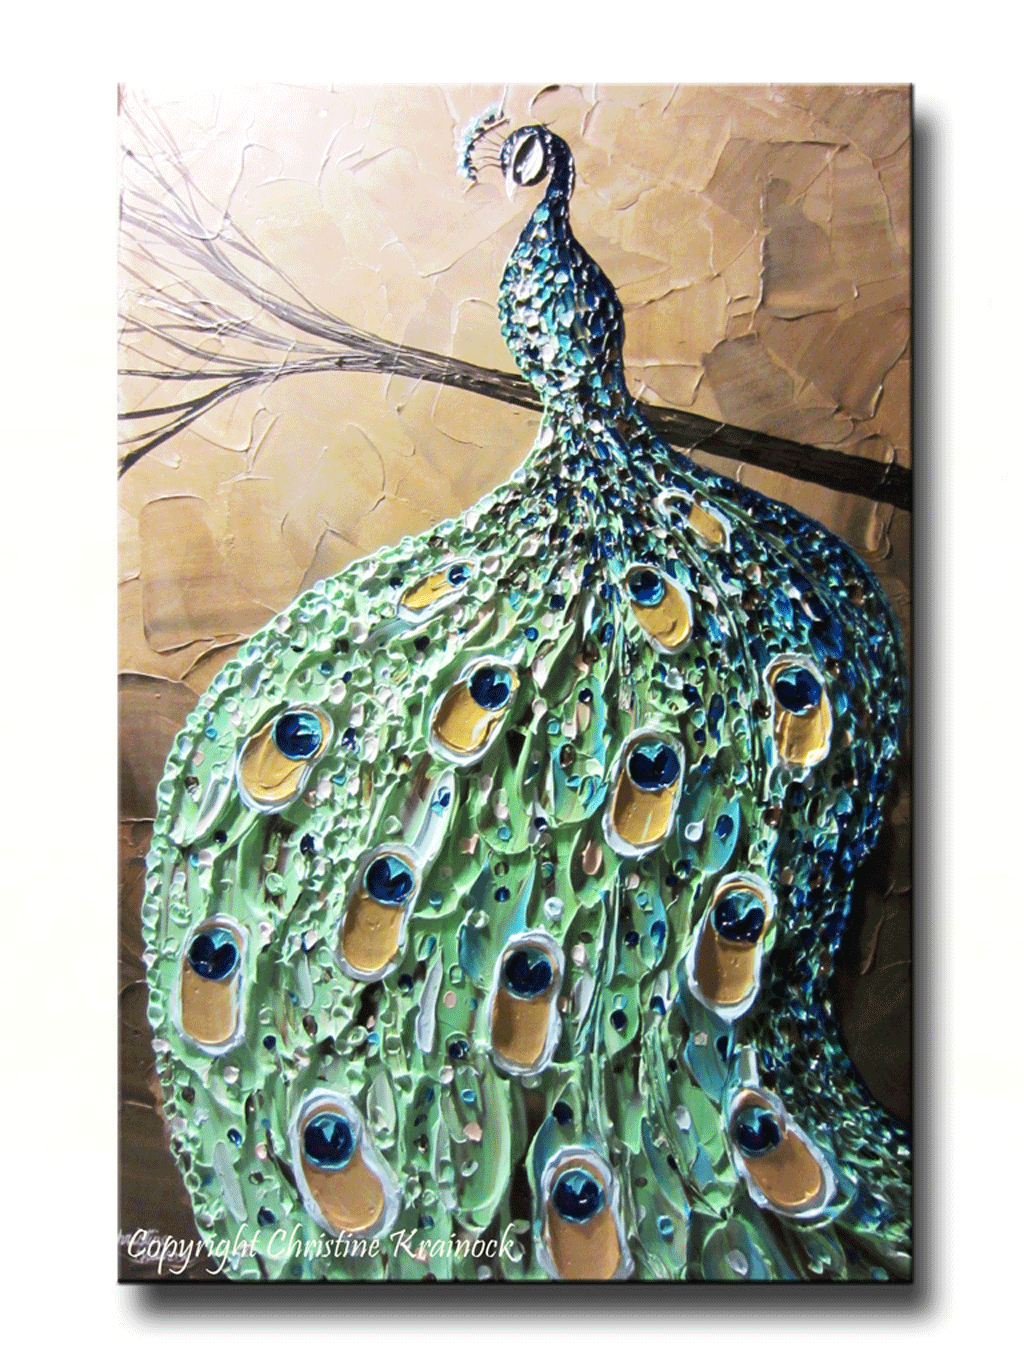 CUSTOM Abstract Painting Peacock Textured Contemporary Art Blue Green Gold MADE to ORDER - Christine Krainock Art - Contemporary Art by Christine - 1